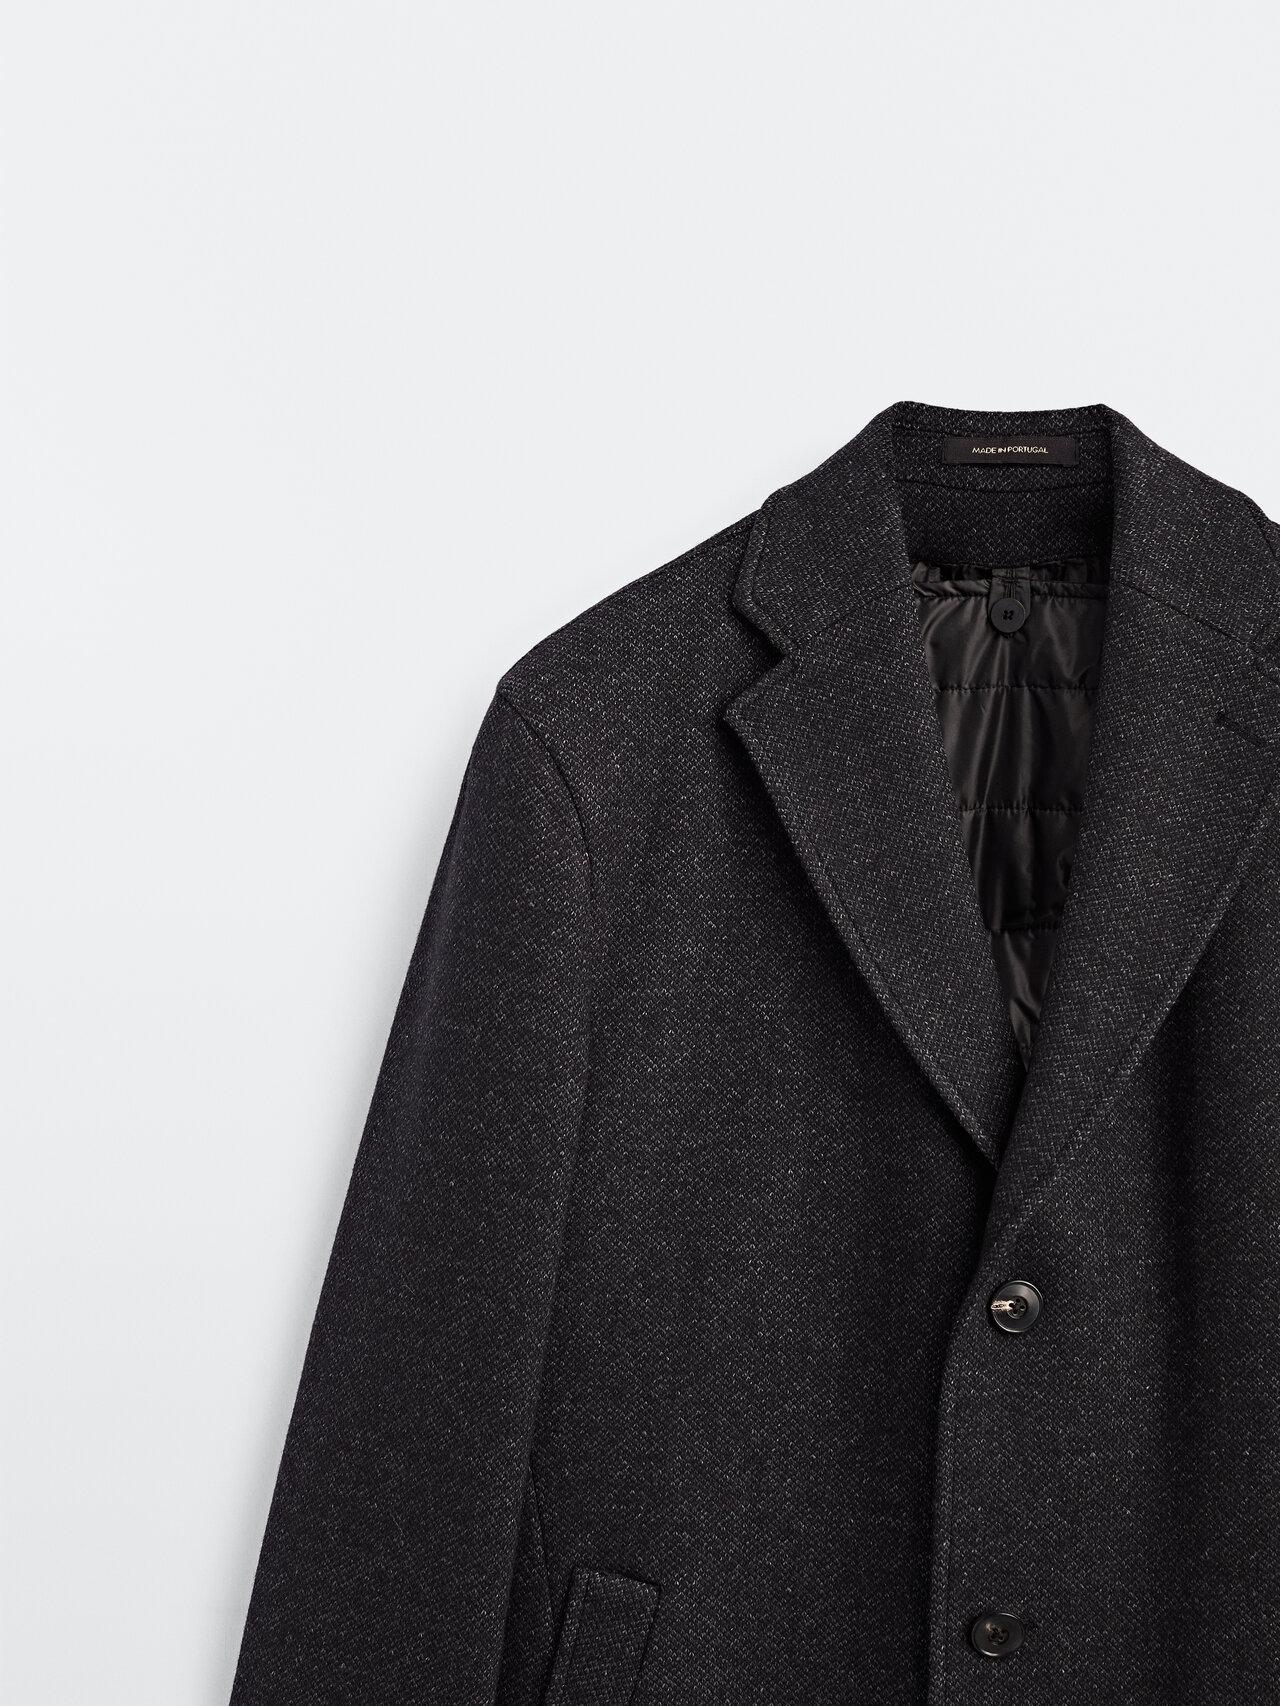 MASSIMO DUTTI Wool Coat With Removable Lining in Gray for Men | Lyst